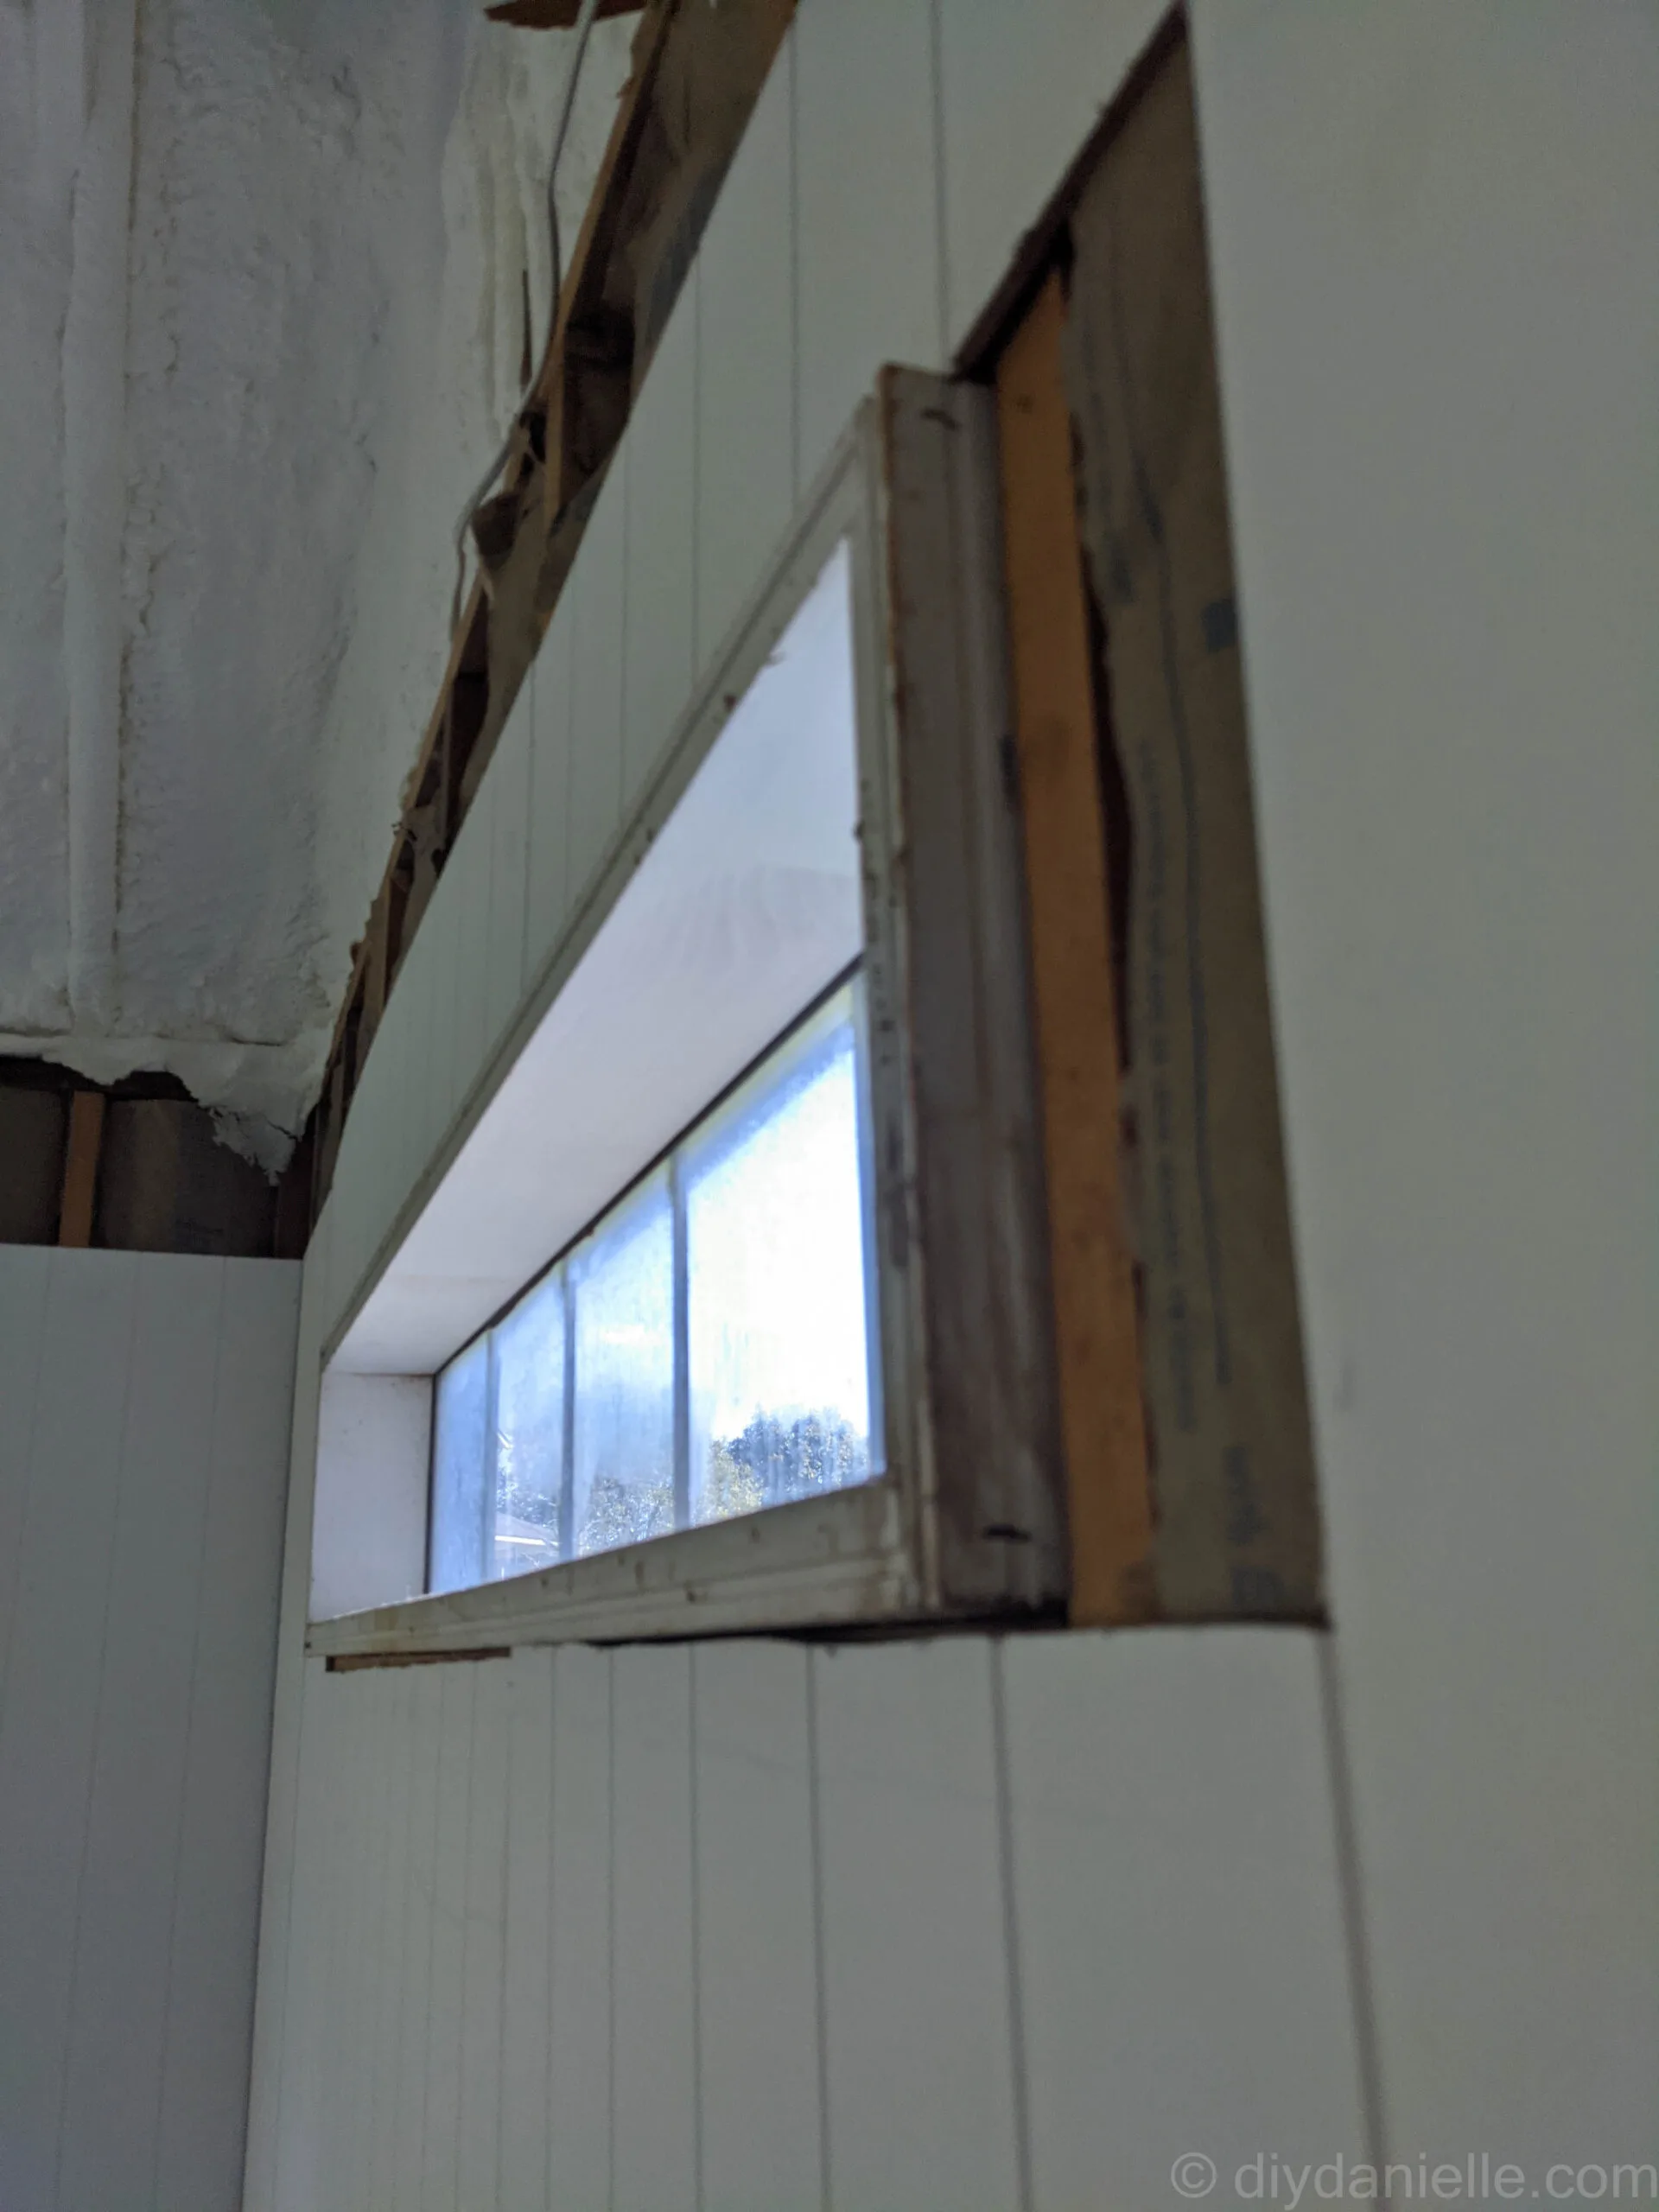 How To Frame Out A Window Easy Window Casing: Adding Interior Window Trim - DIY Danielle®